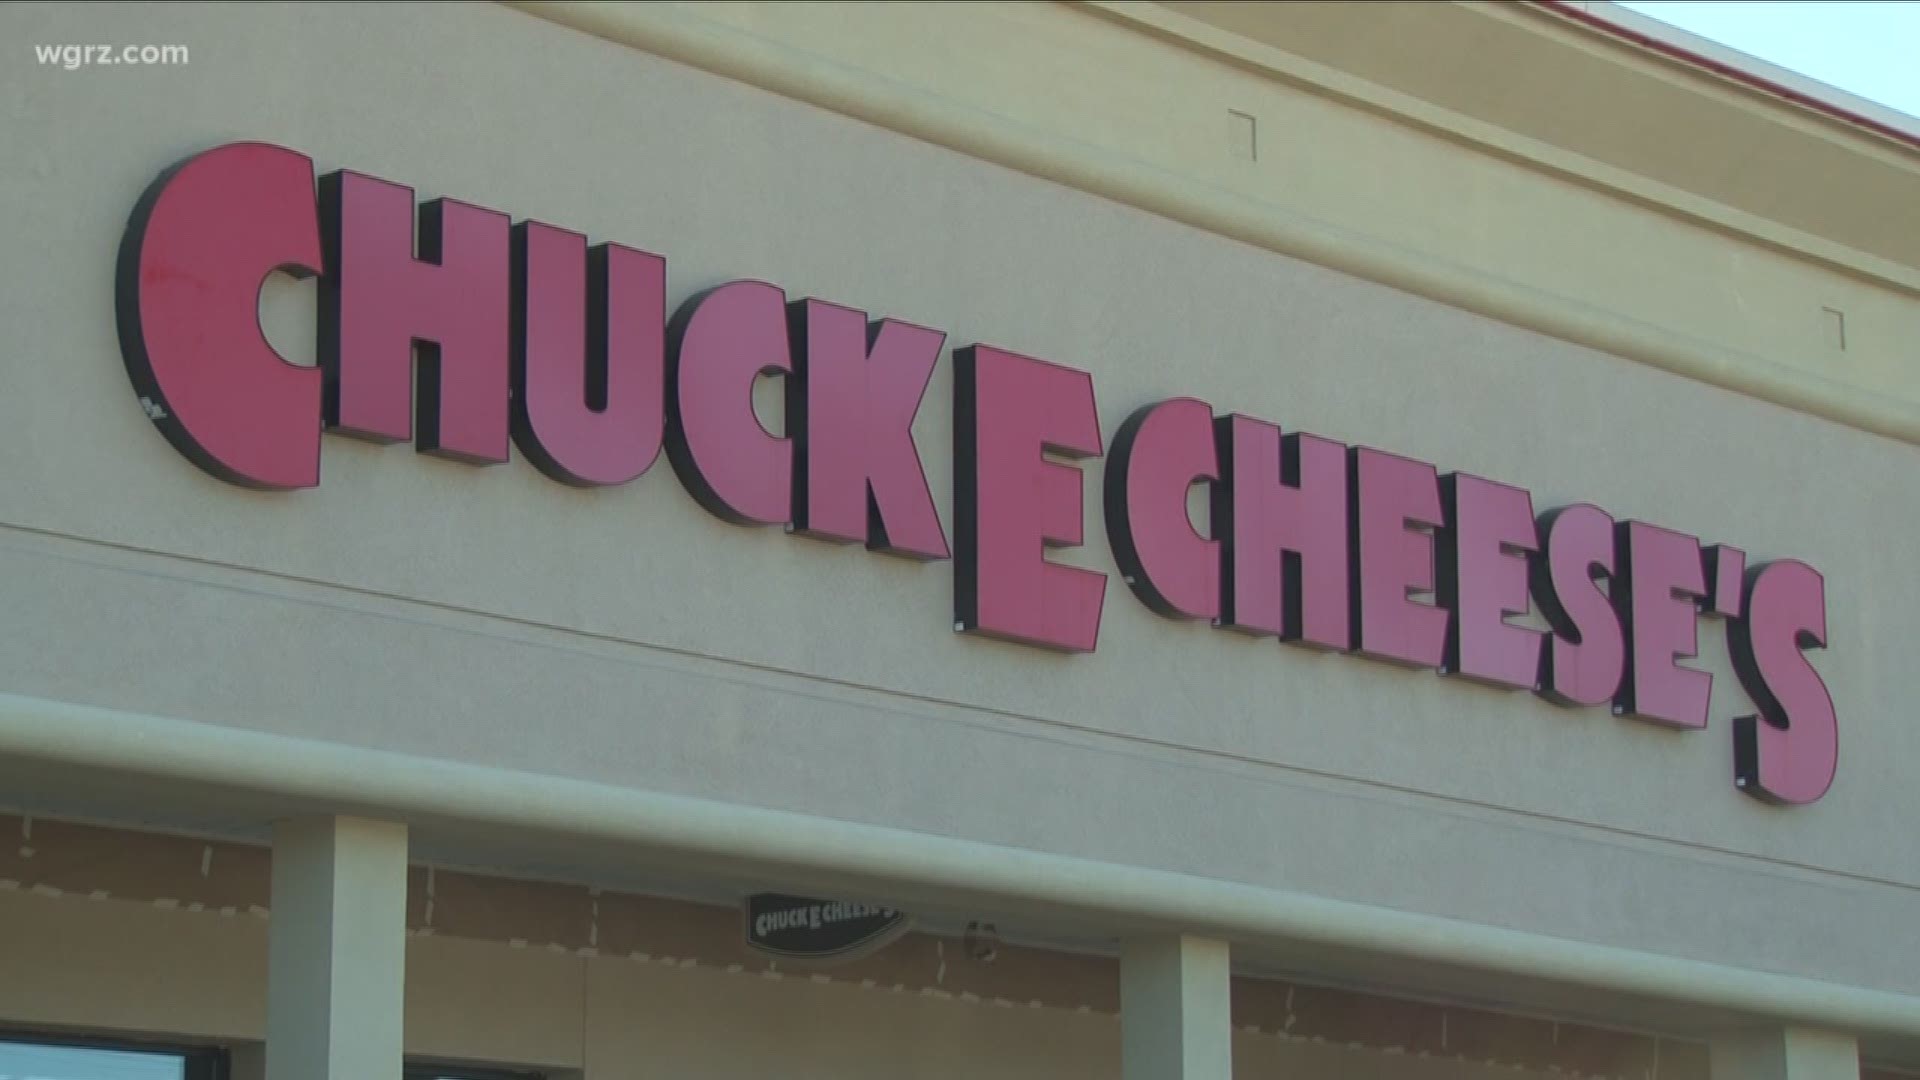 Should Chuck E Cheese In Amherst Shut Down?